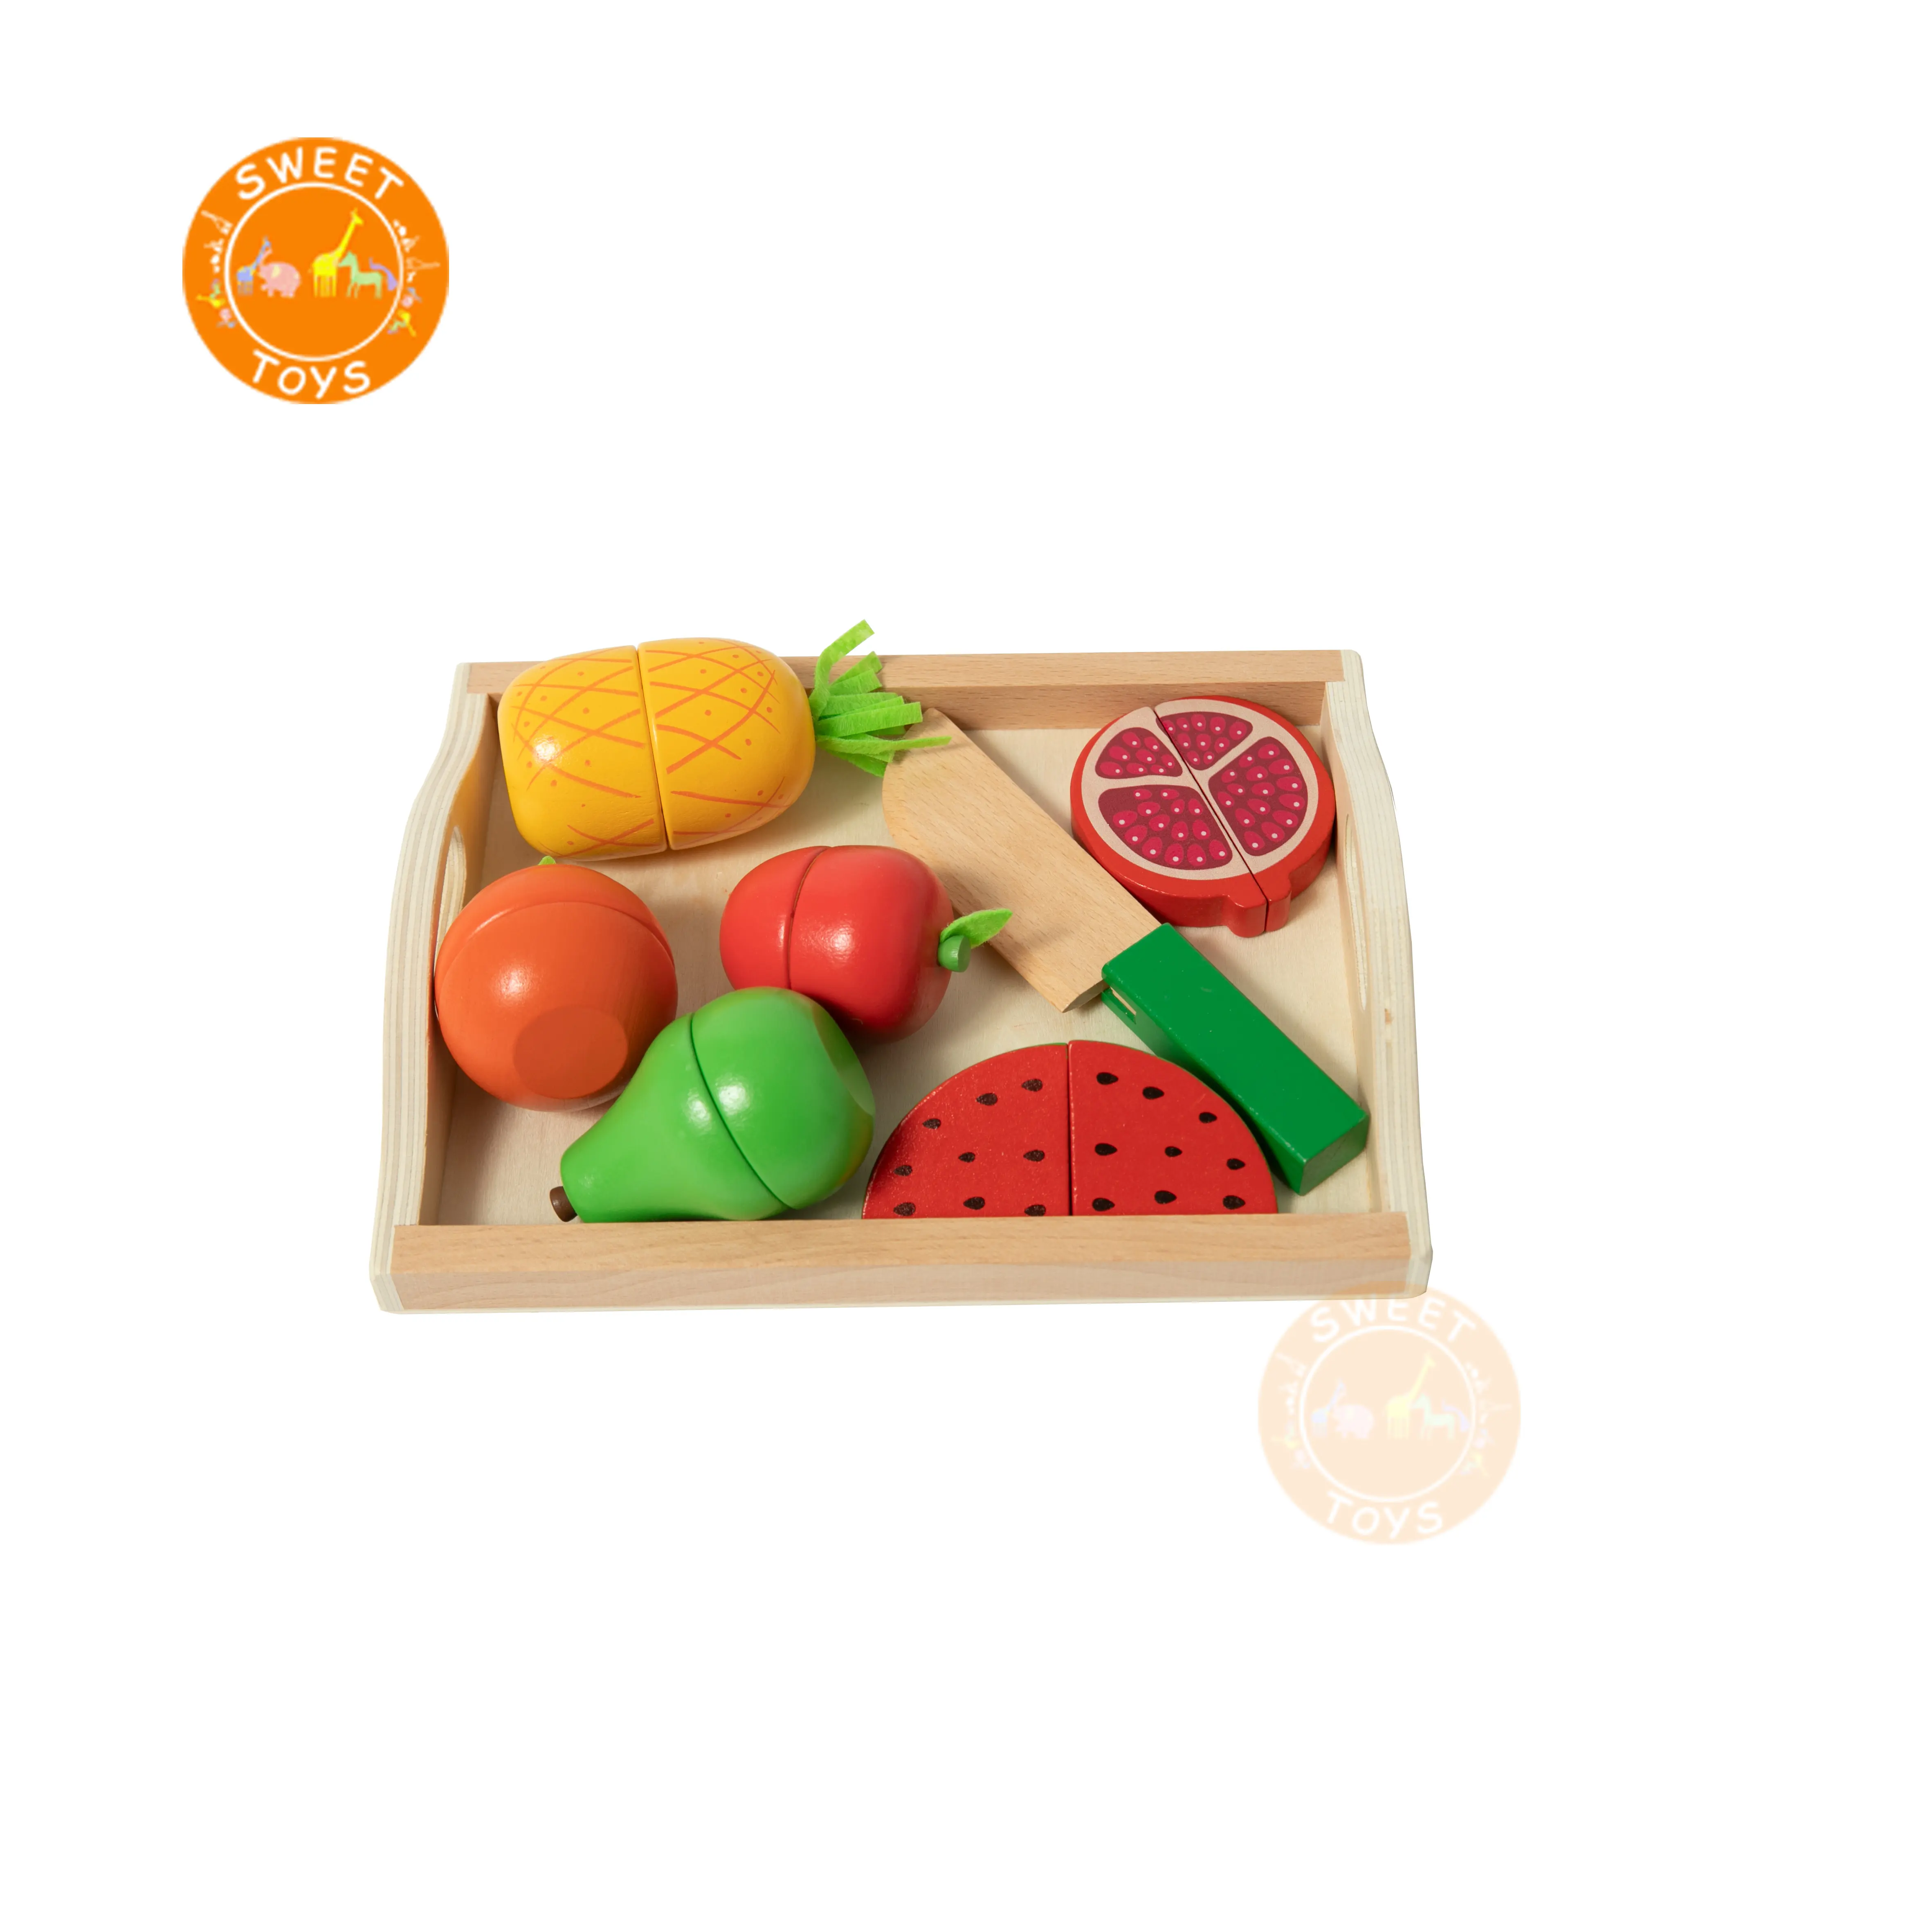 Simulation fruits cutting toys wooden kitchen role play cutting toys set for kids early education